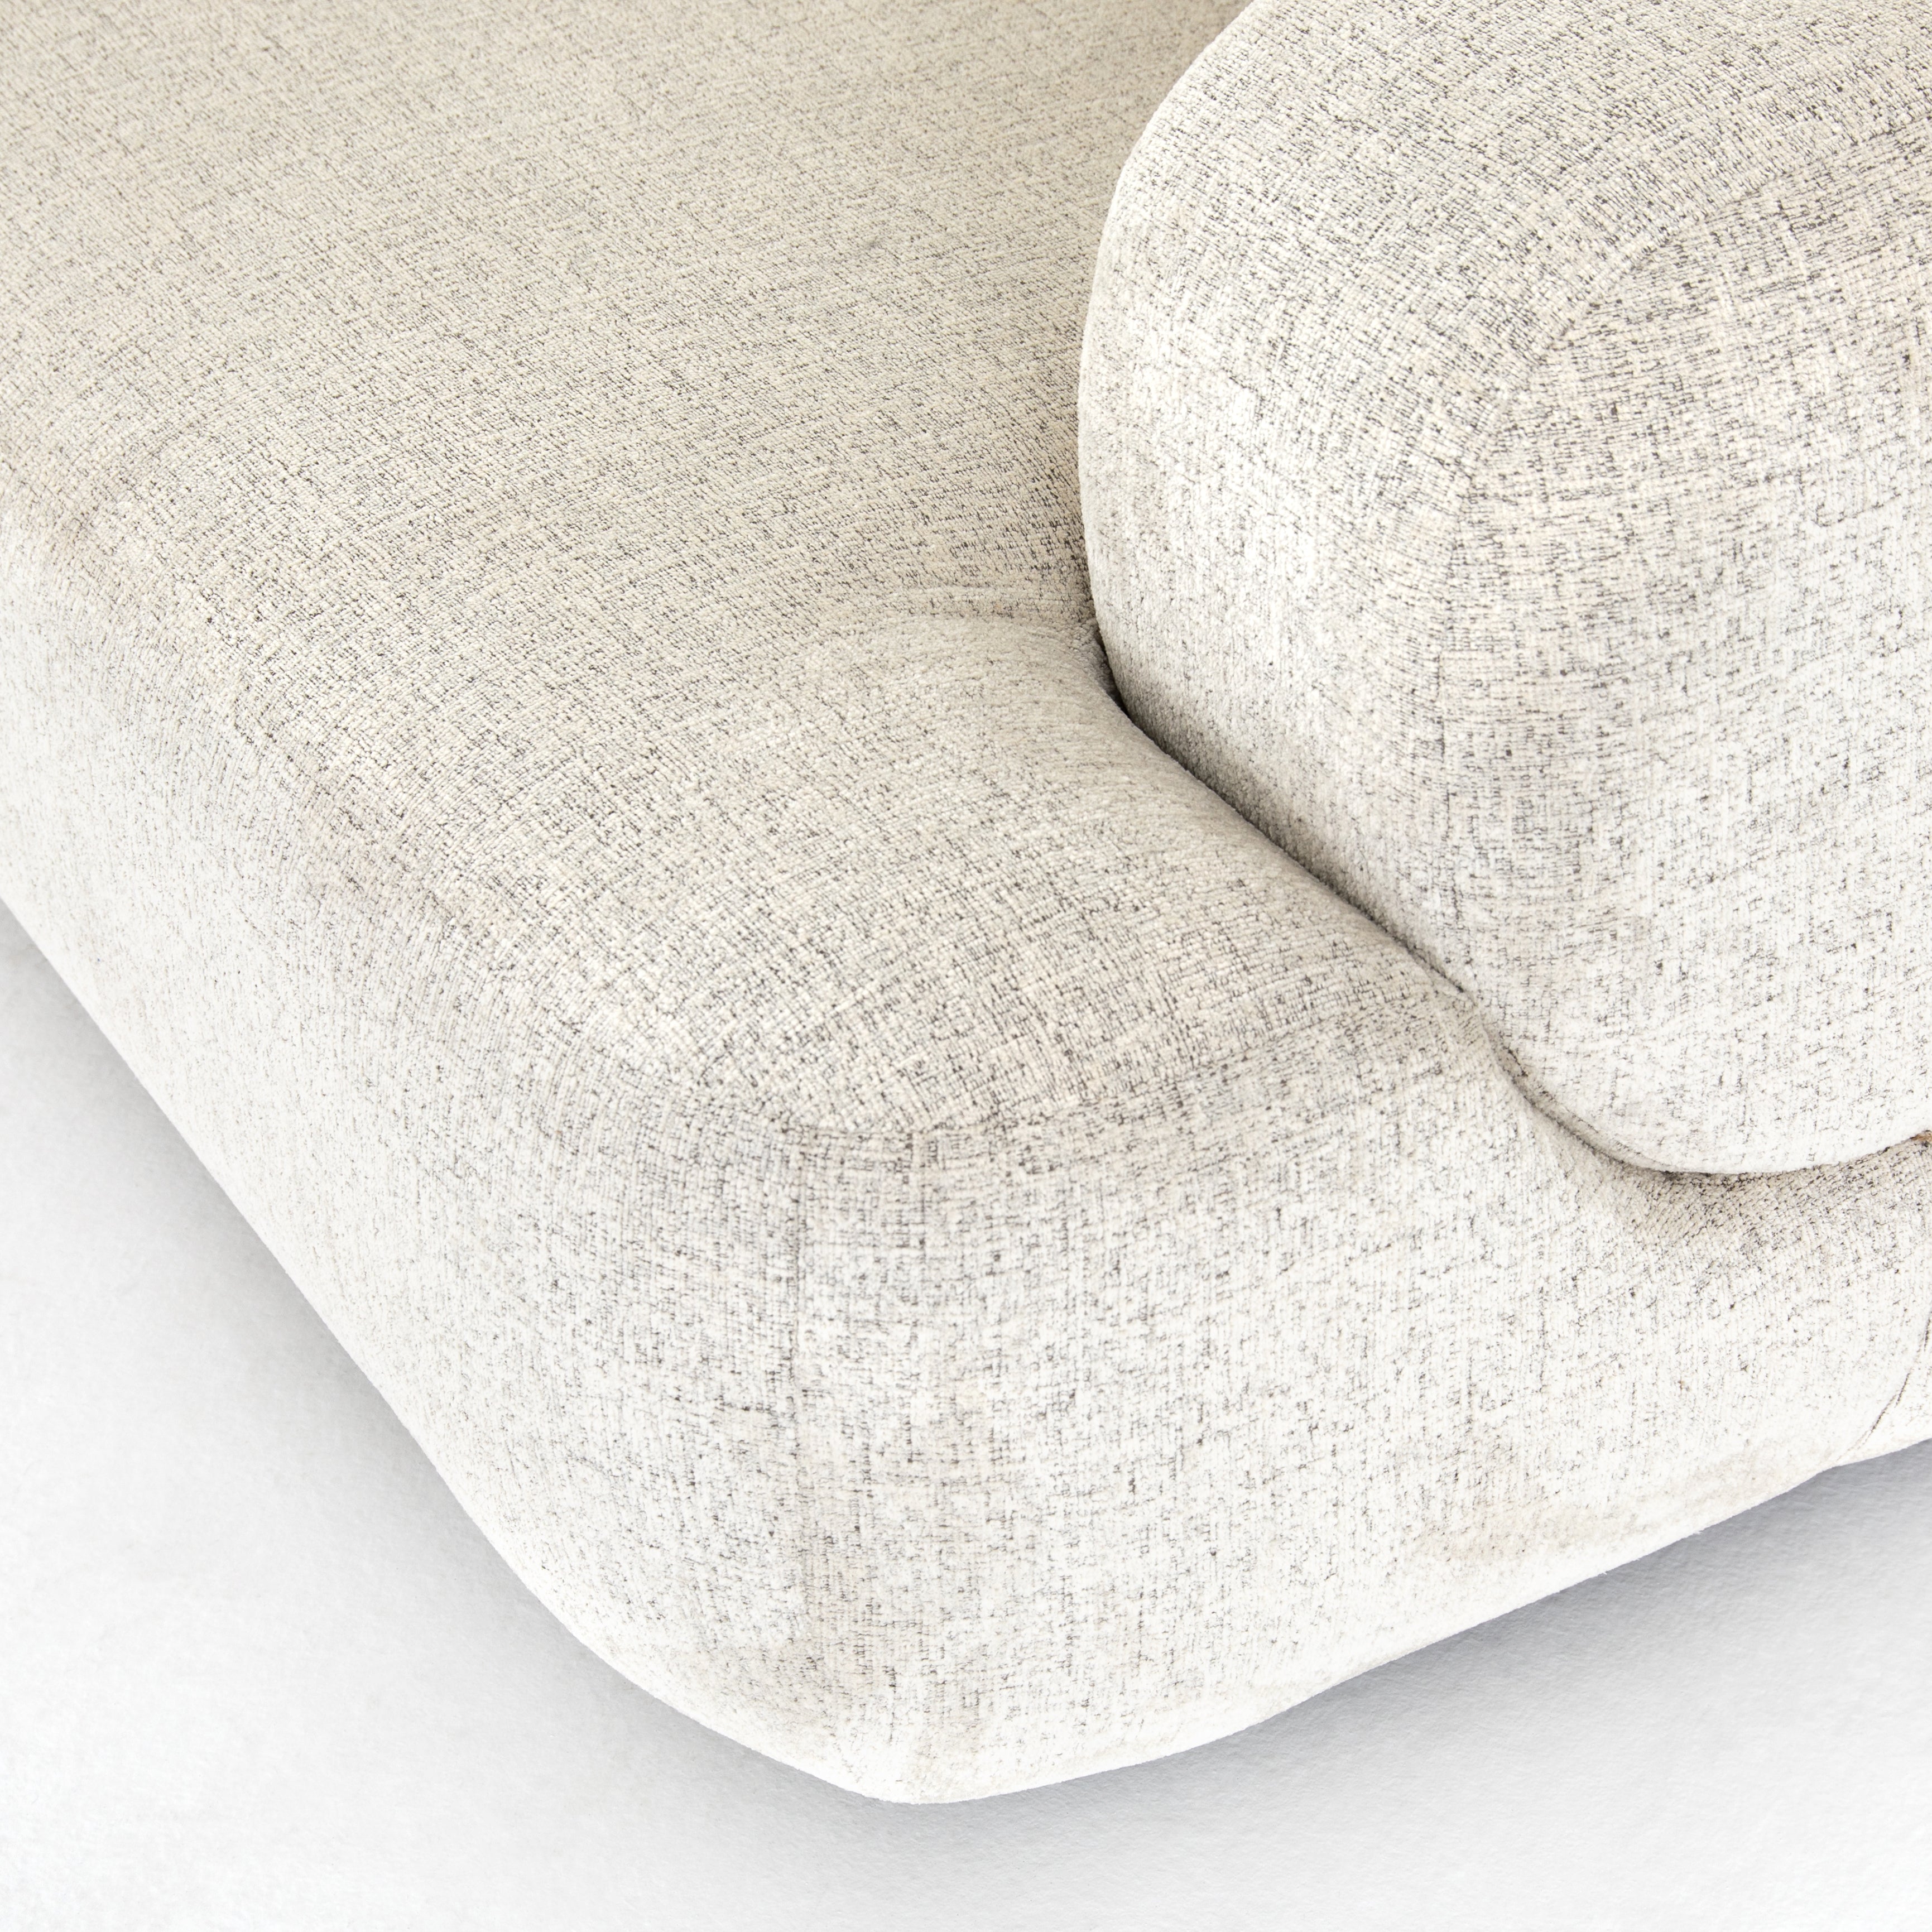 We love the chunky arms of this Benito 90" Sofa - Plushtone Linen. Plush chenille-like upholstery emits highs and lows for a refined look and textural feel with eye-catching highs and lows. Rounded edges and roomy seating space for any living room, den, or lounge area.   Overall Dimensions: 90.00"w x 40.00"d x 33.00"h